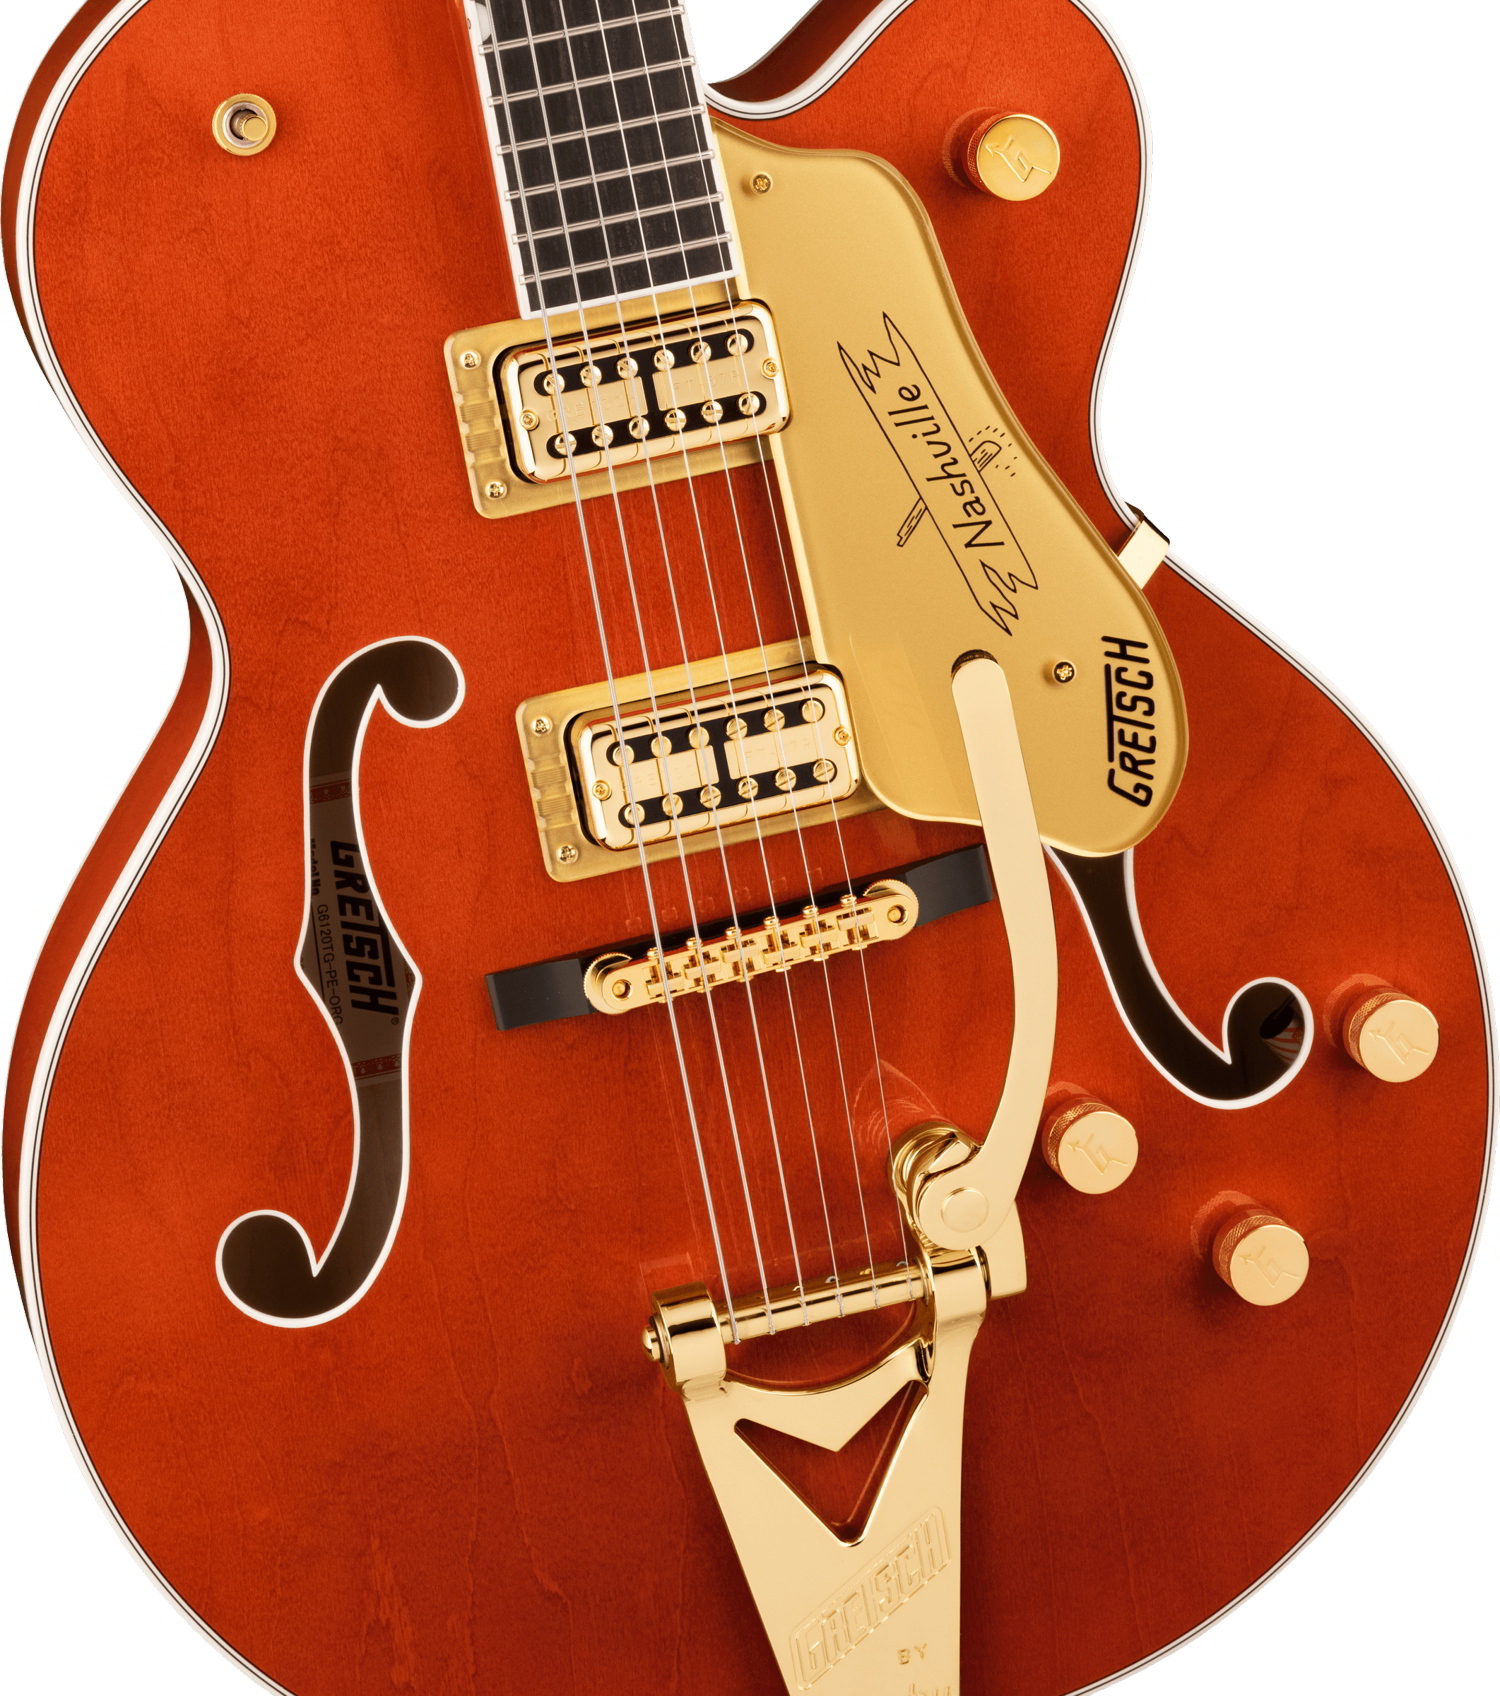 G6120TG Players Edition Nashville® Hollow Body with String-Thru Bigsby® and Gold Hardware, Ebony Fingerboard, Orange Stain追加画像